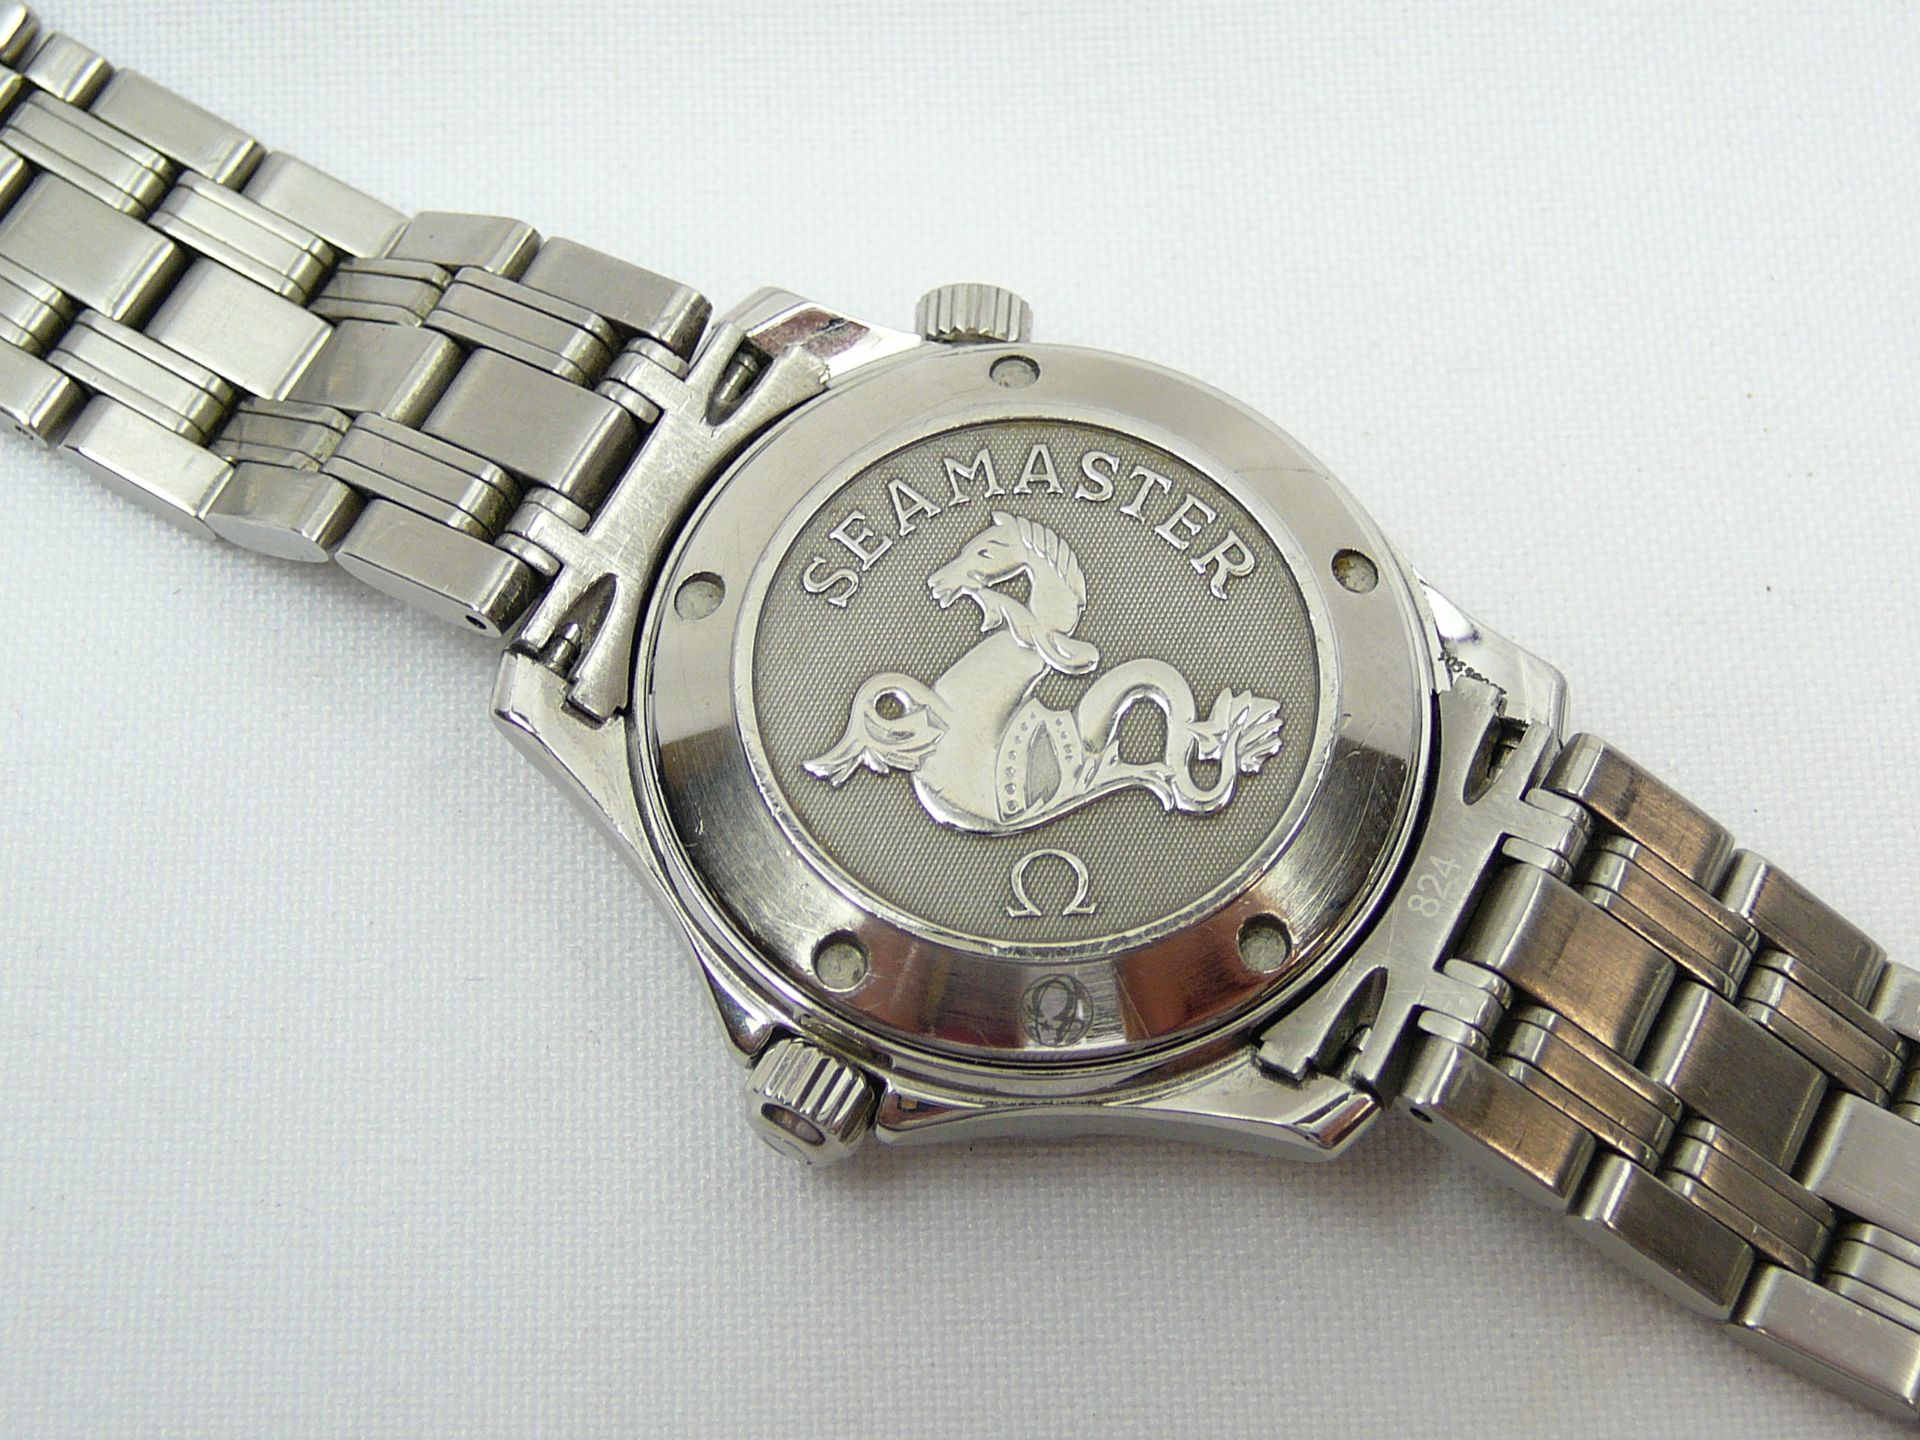 Gents Omega Wristwatch - Image 3 of 4